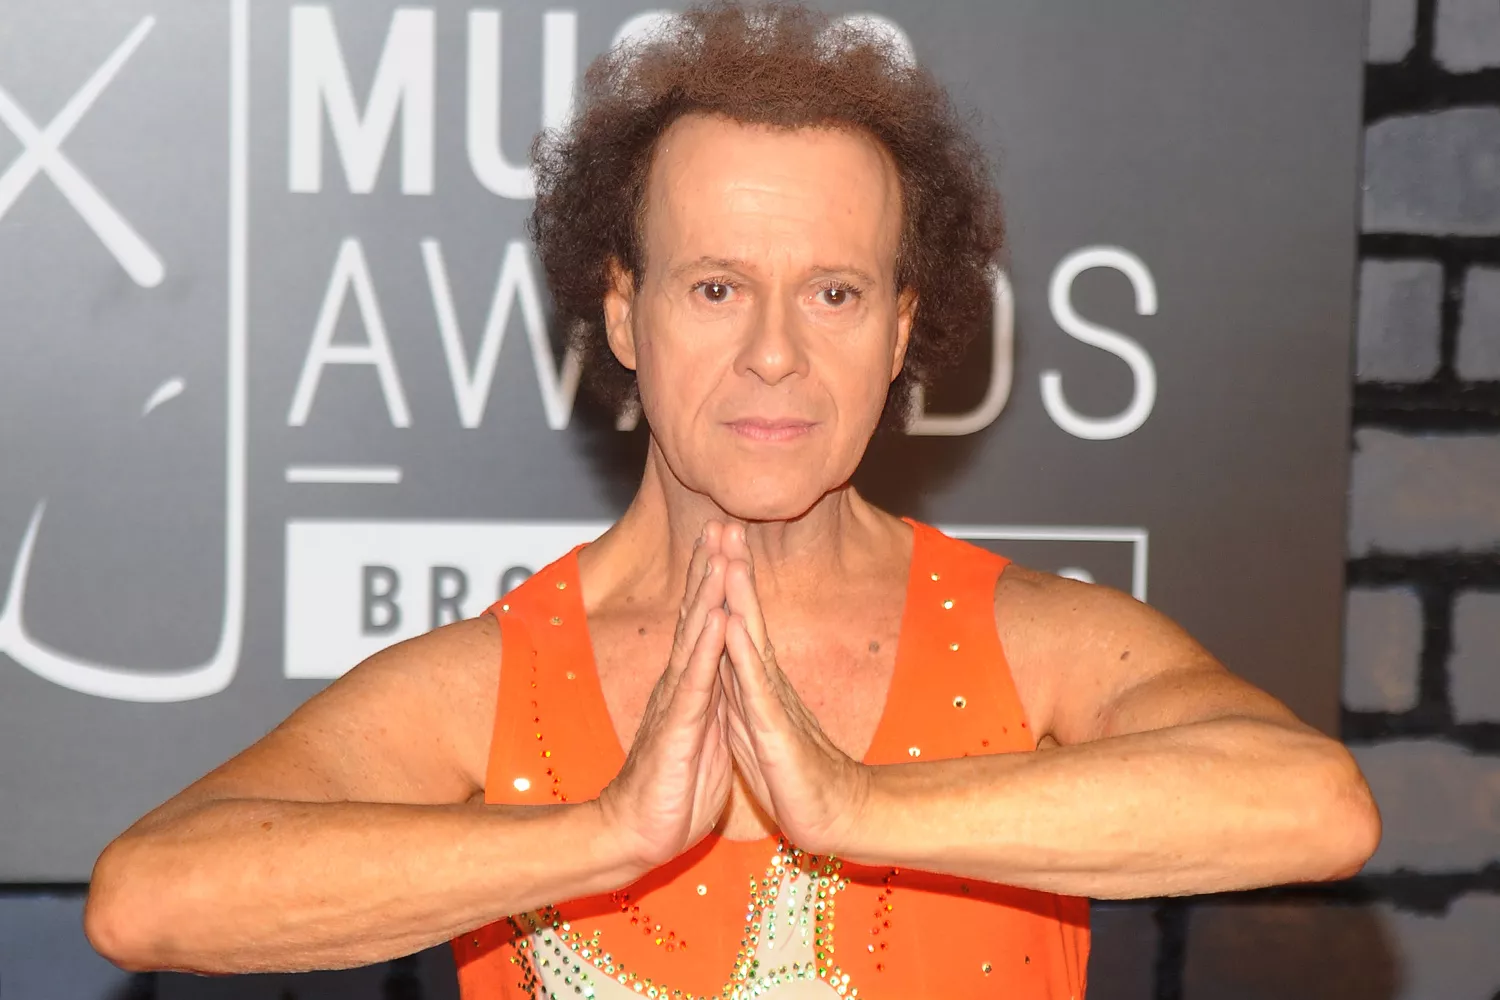 Richard Simmons Disapproves of Pauly Shore Biopic